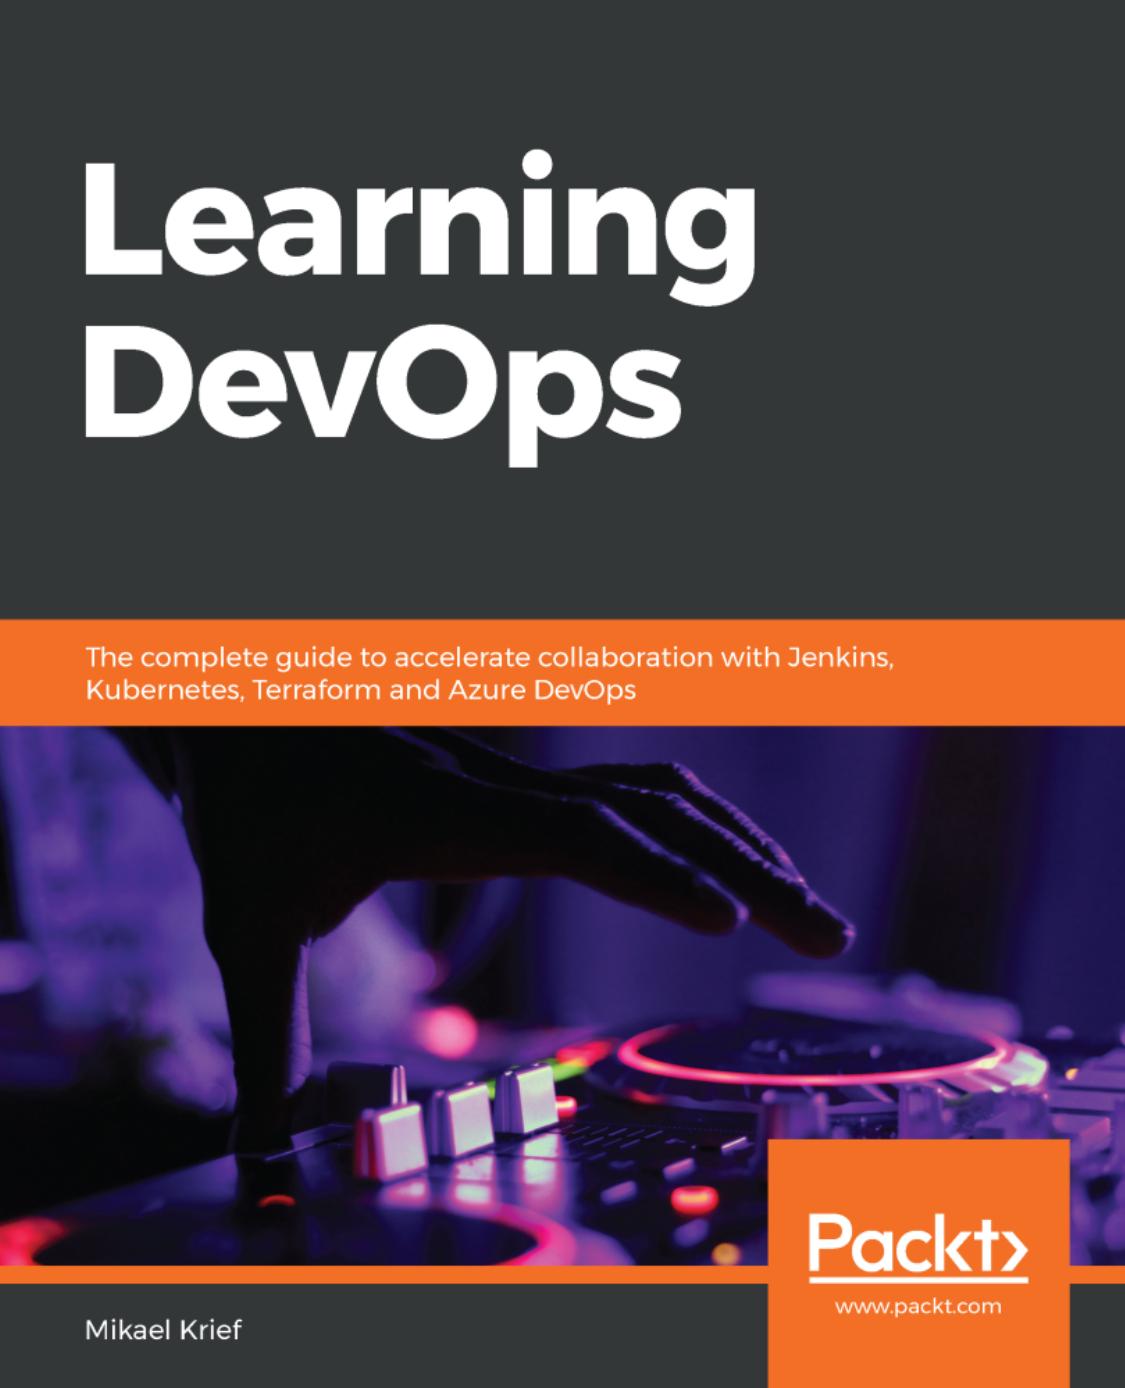 Learning DevOps The complete guide to accelerate collaboration with Jenkins, Kubernetes, Terraform and A